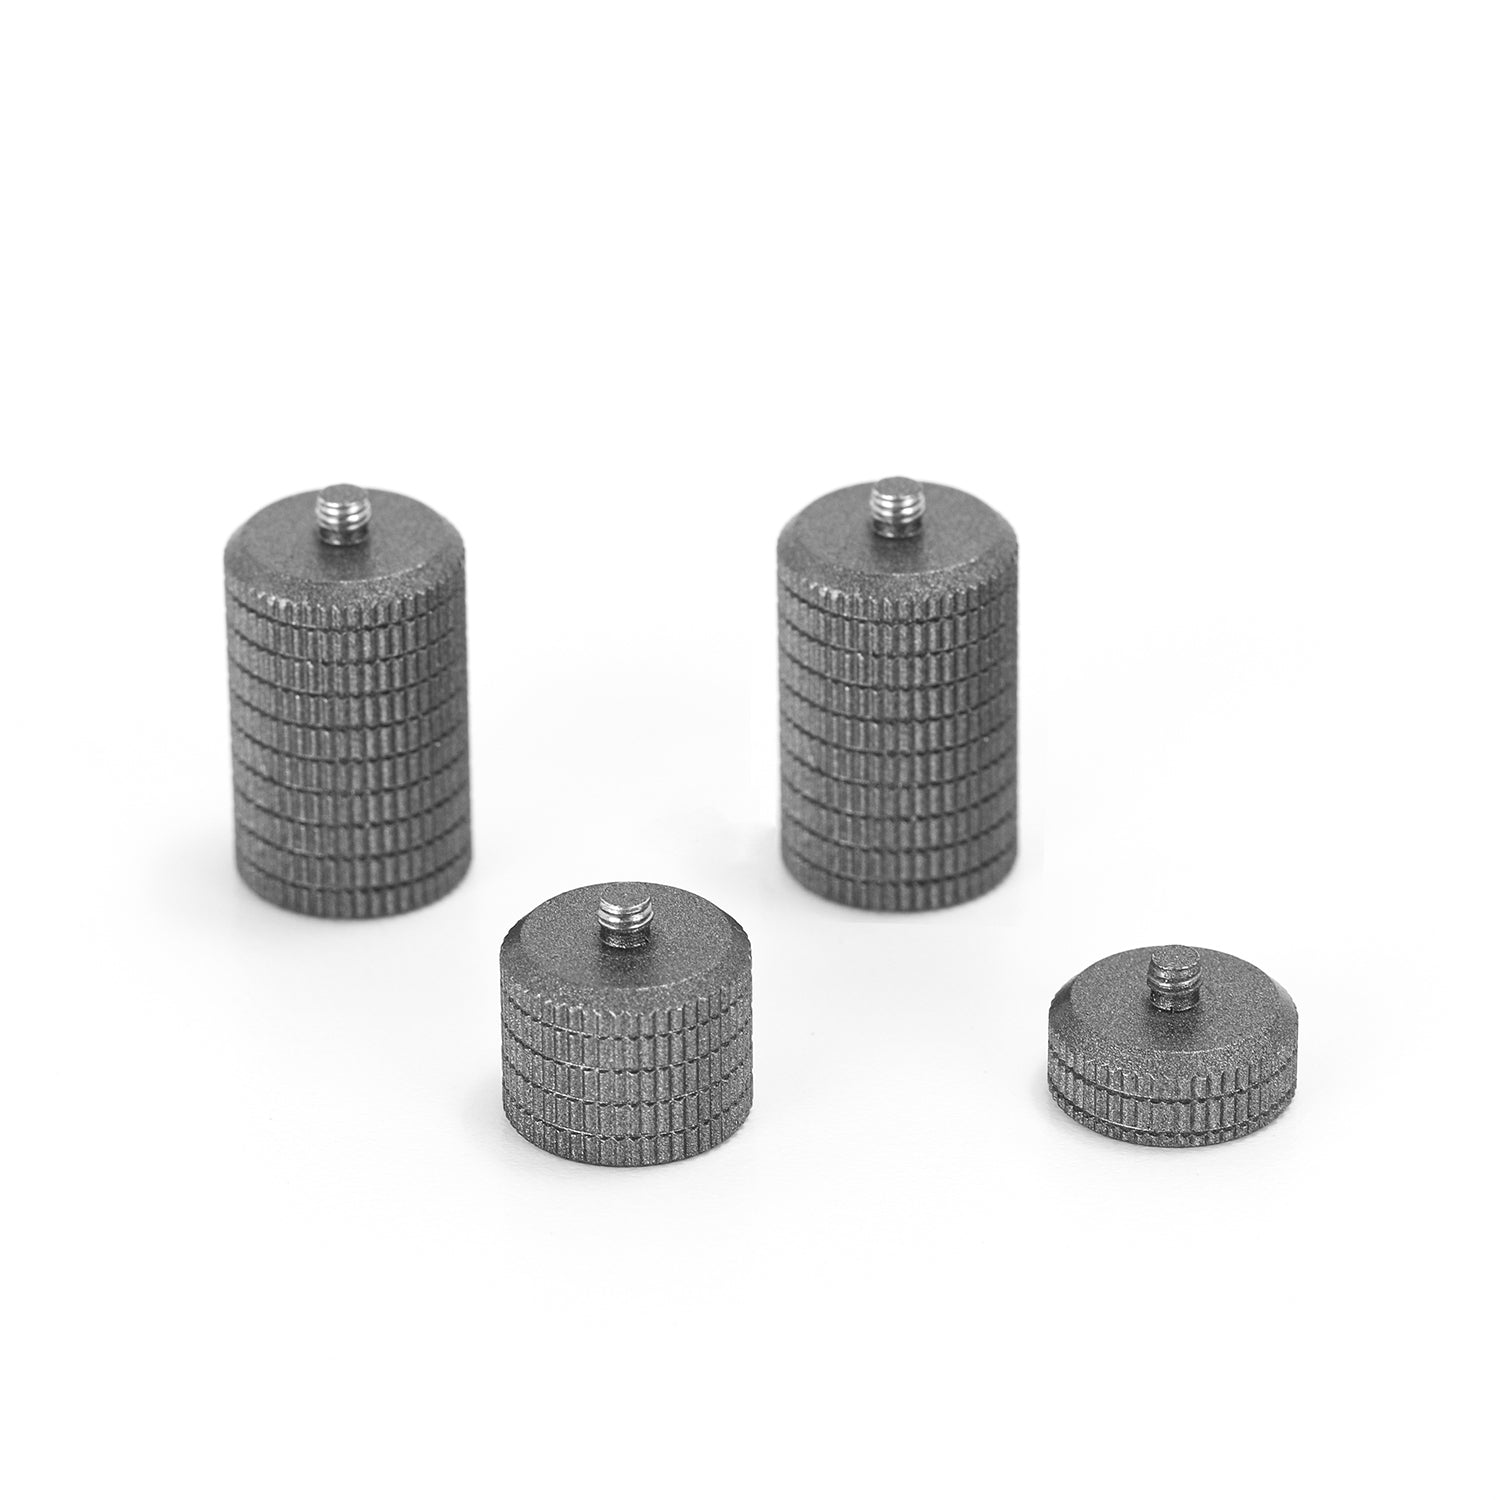 Counterweight for Osmo 5 (OM 5), Osmo 4 (OM 4) and Osmo 3 - SANDMARC (1)